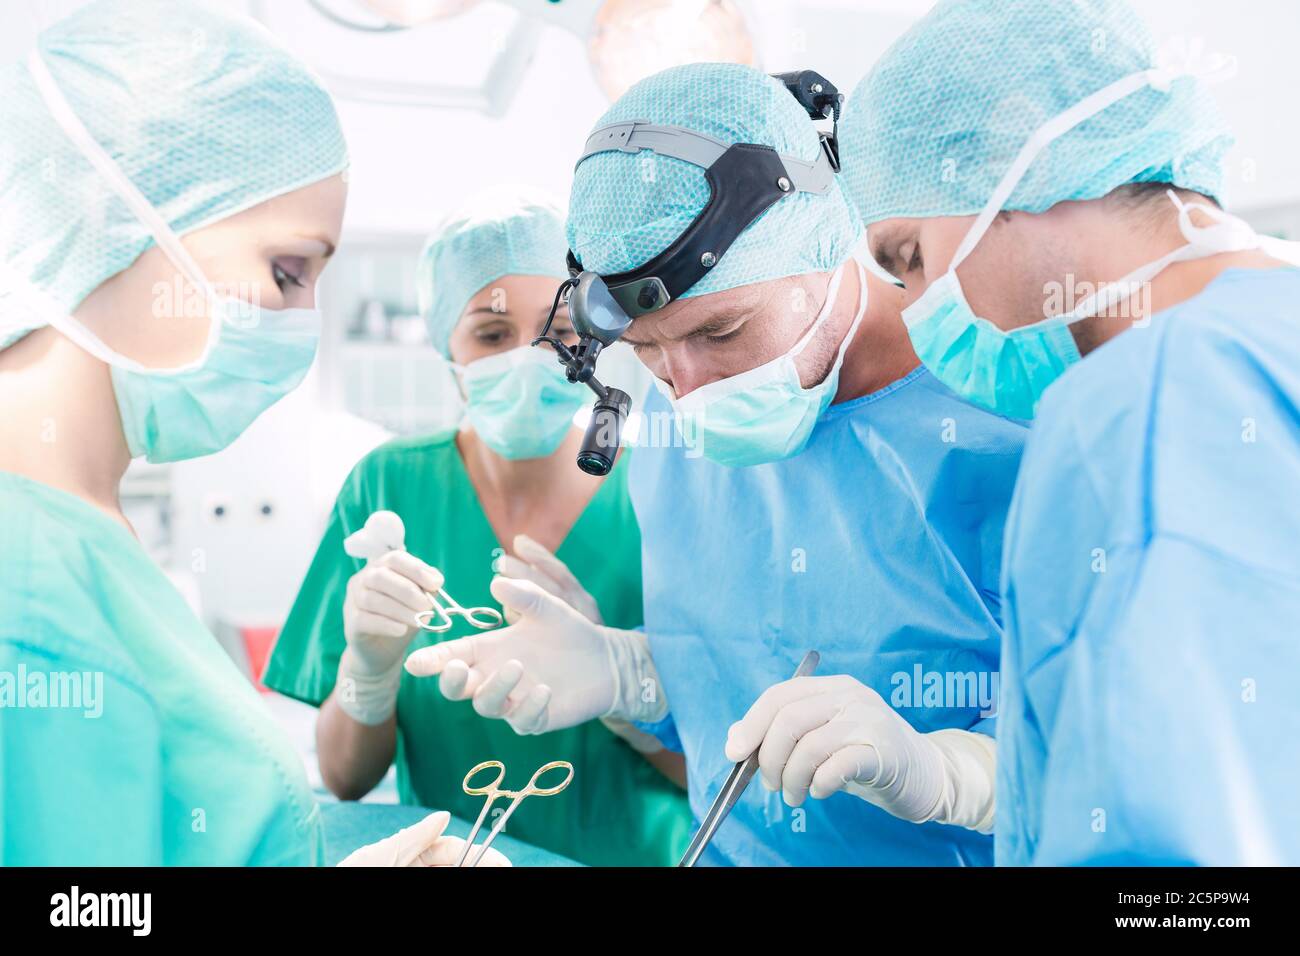 Surgeons operating patient in operation theater Stock Photo